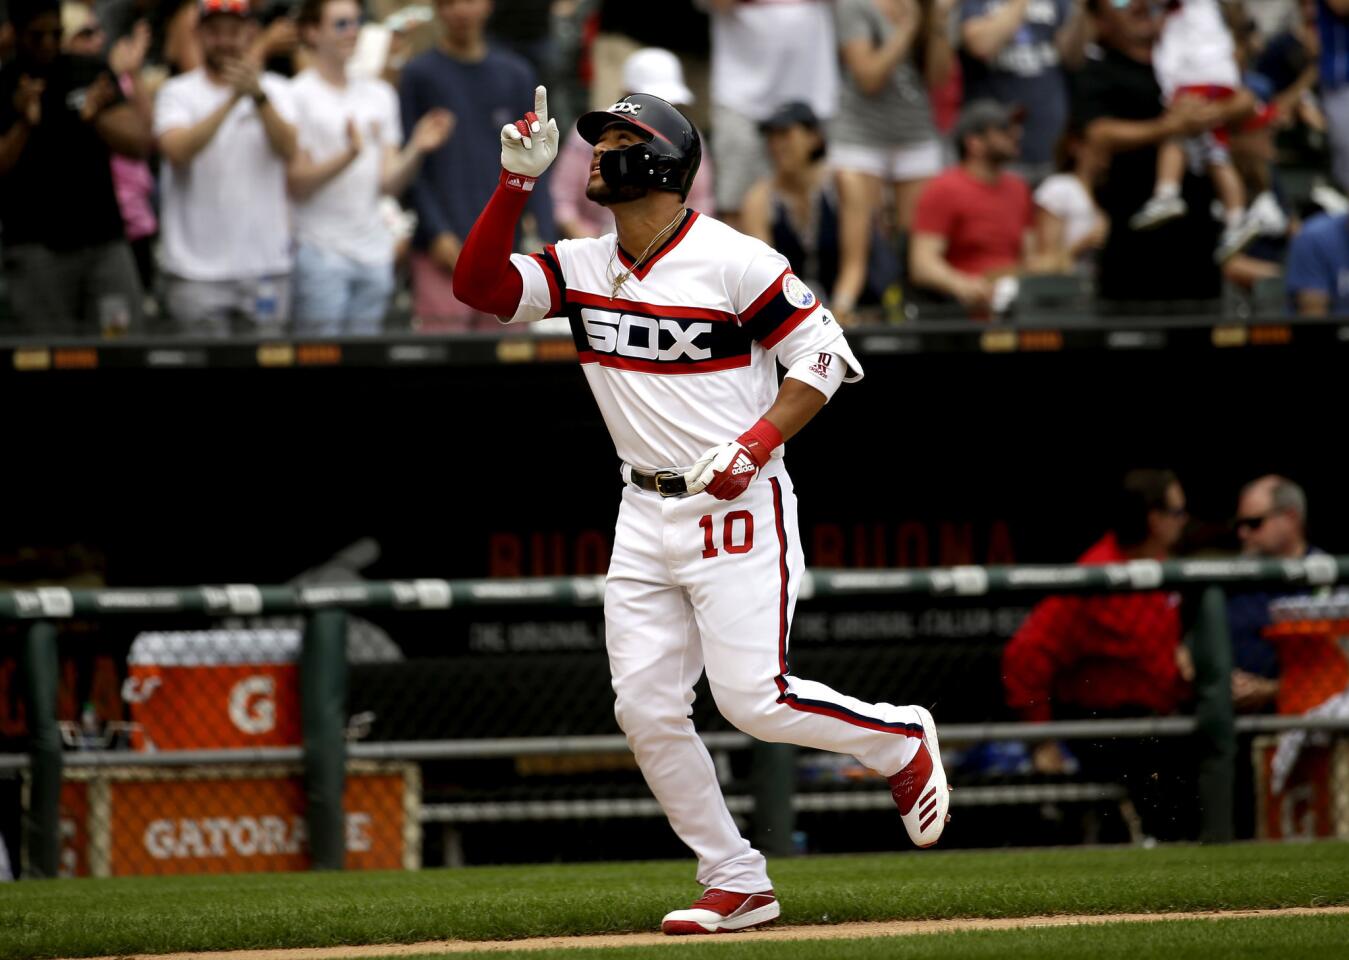 Yoan Moncada celebrates his two-run home run in the bottom of the third inning against the Twins at Guaranteed Rate Field on June 30, 2019.